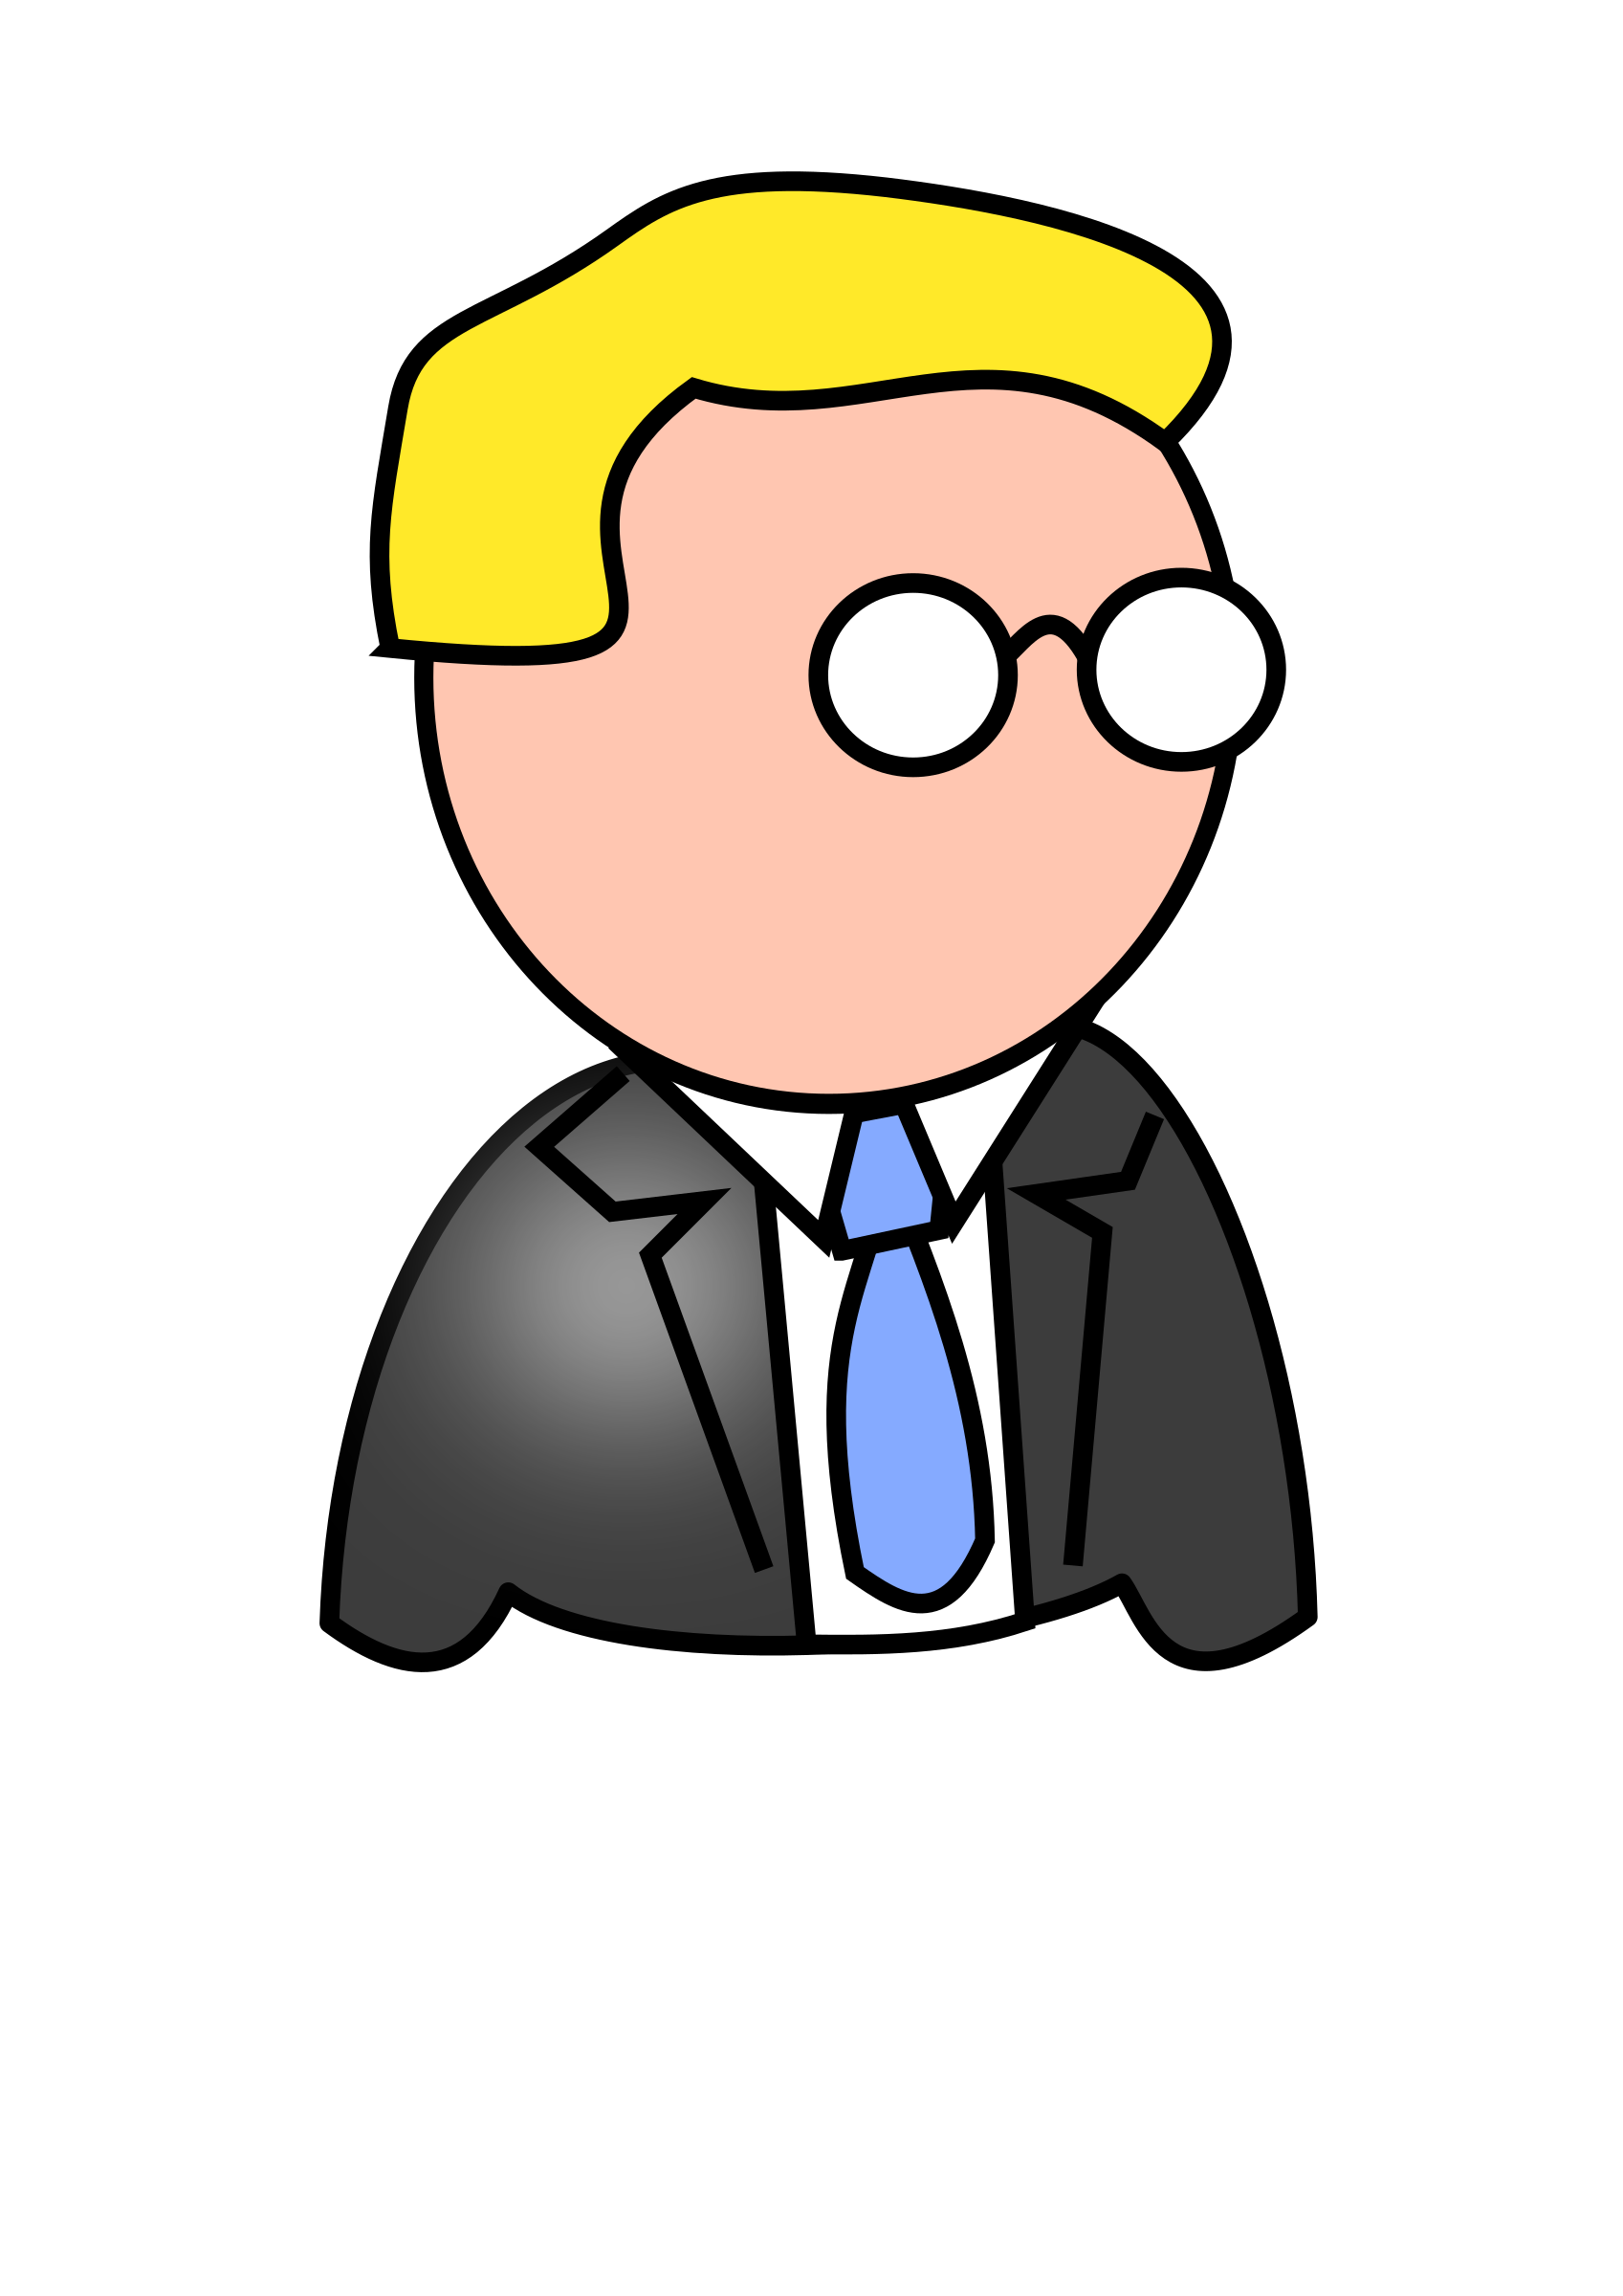 Big image png. Excited clipart businessman